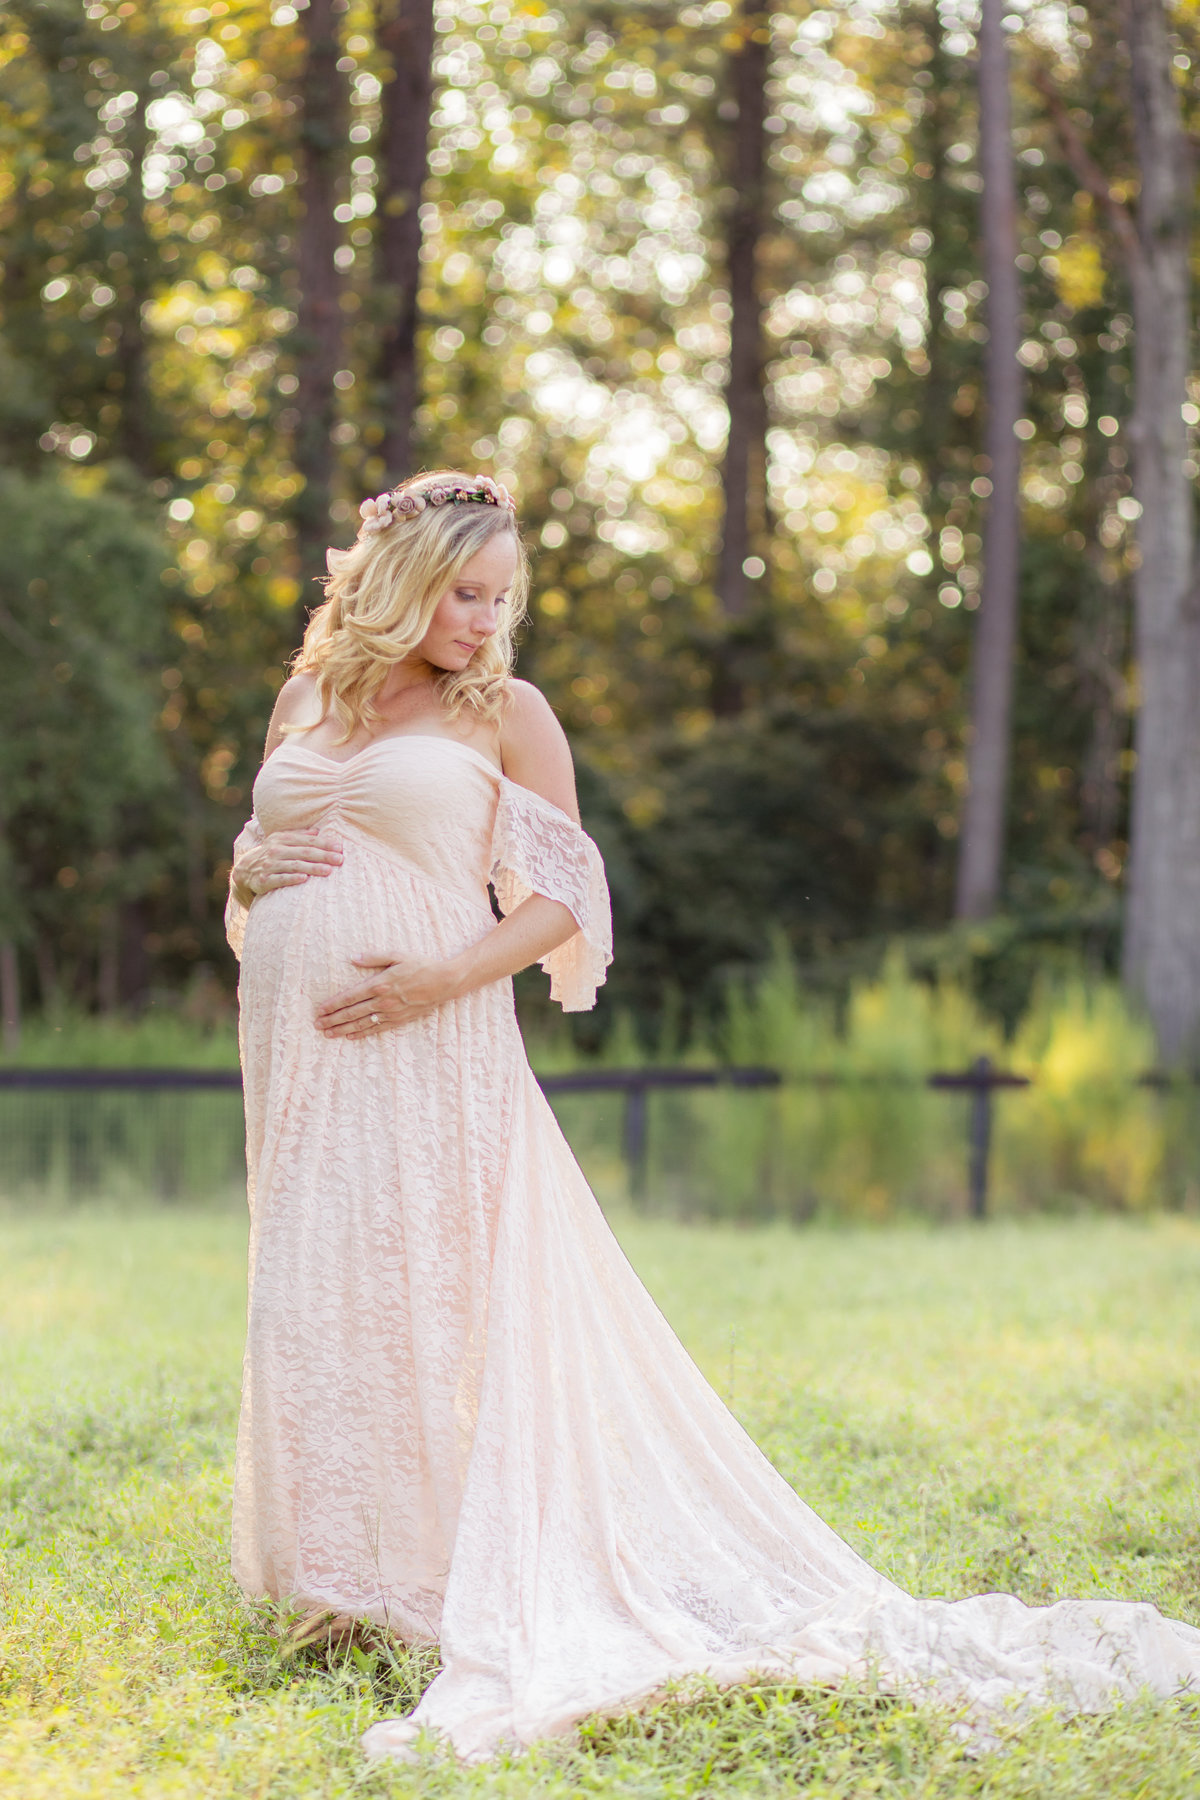 Photography by Tiffany - Fayetteville NC Photographer - Maternity Photography  - August 19, 2017 - 6